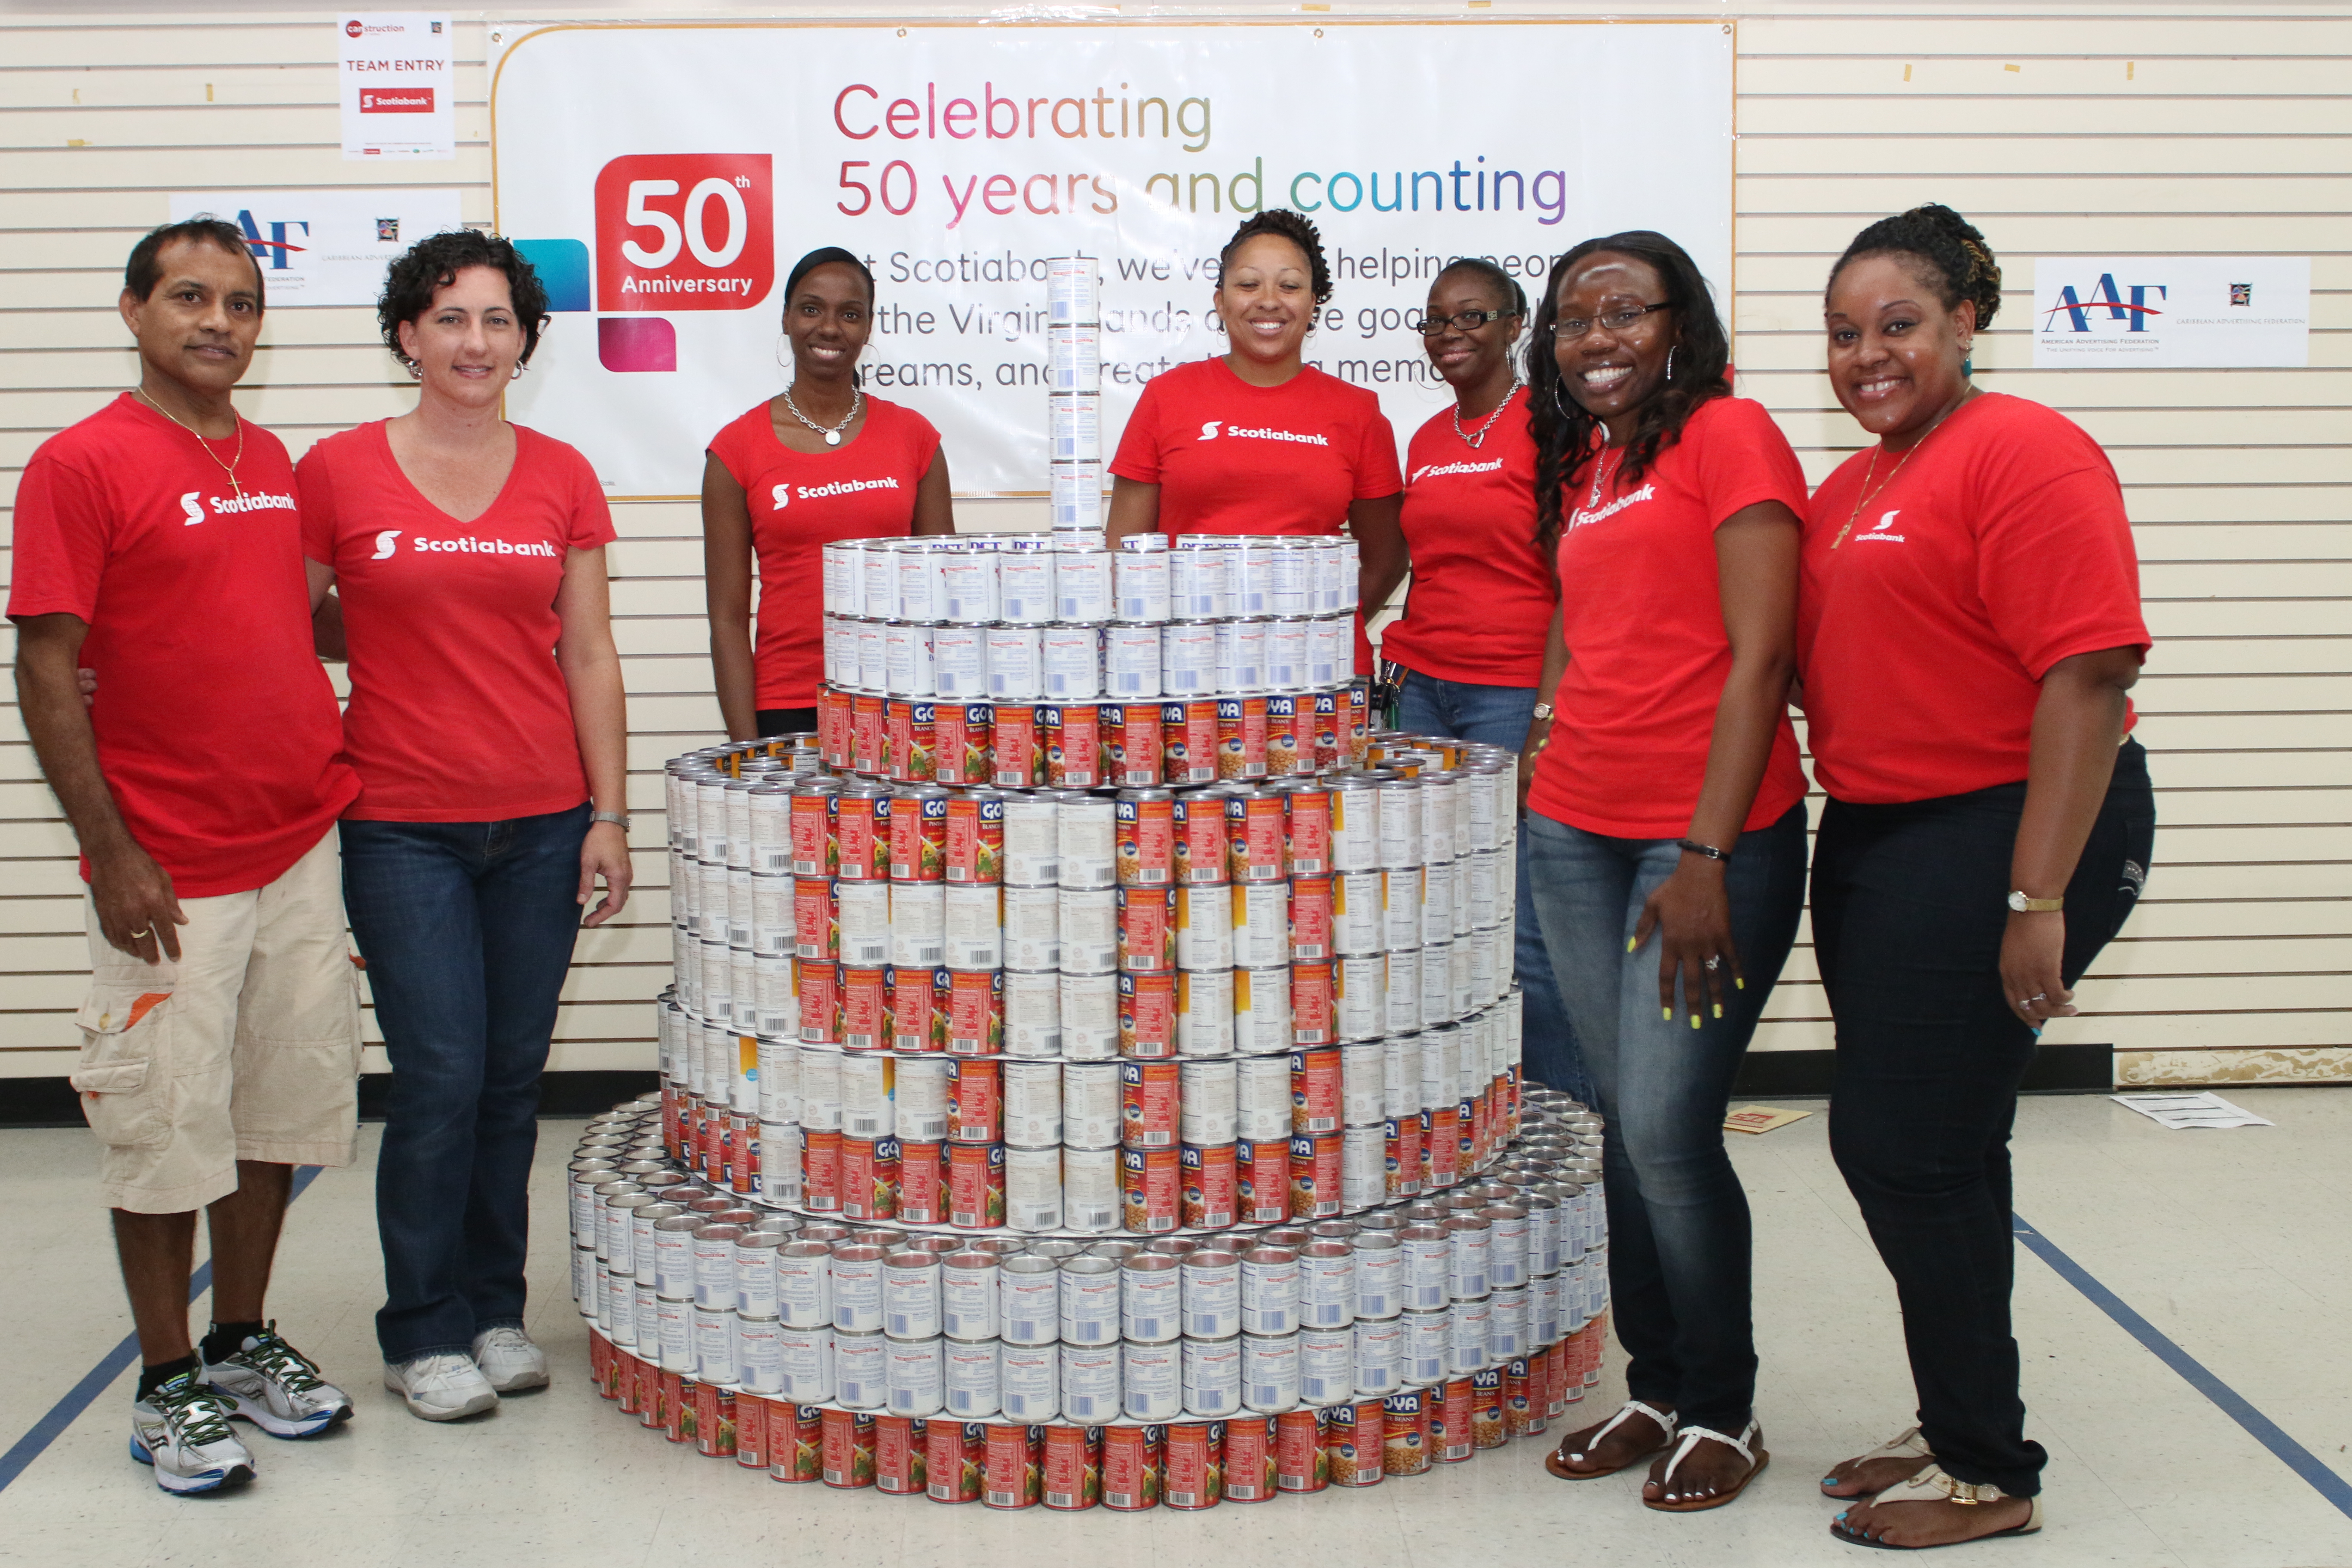 Scotiabank's entry is a 50th Anniversary Cake in Canstruction Competition